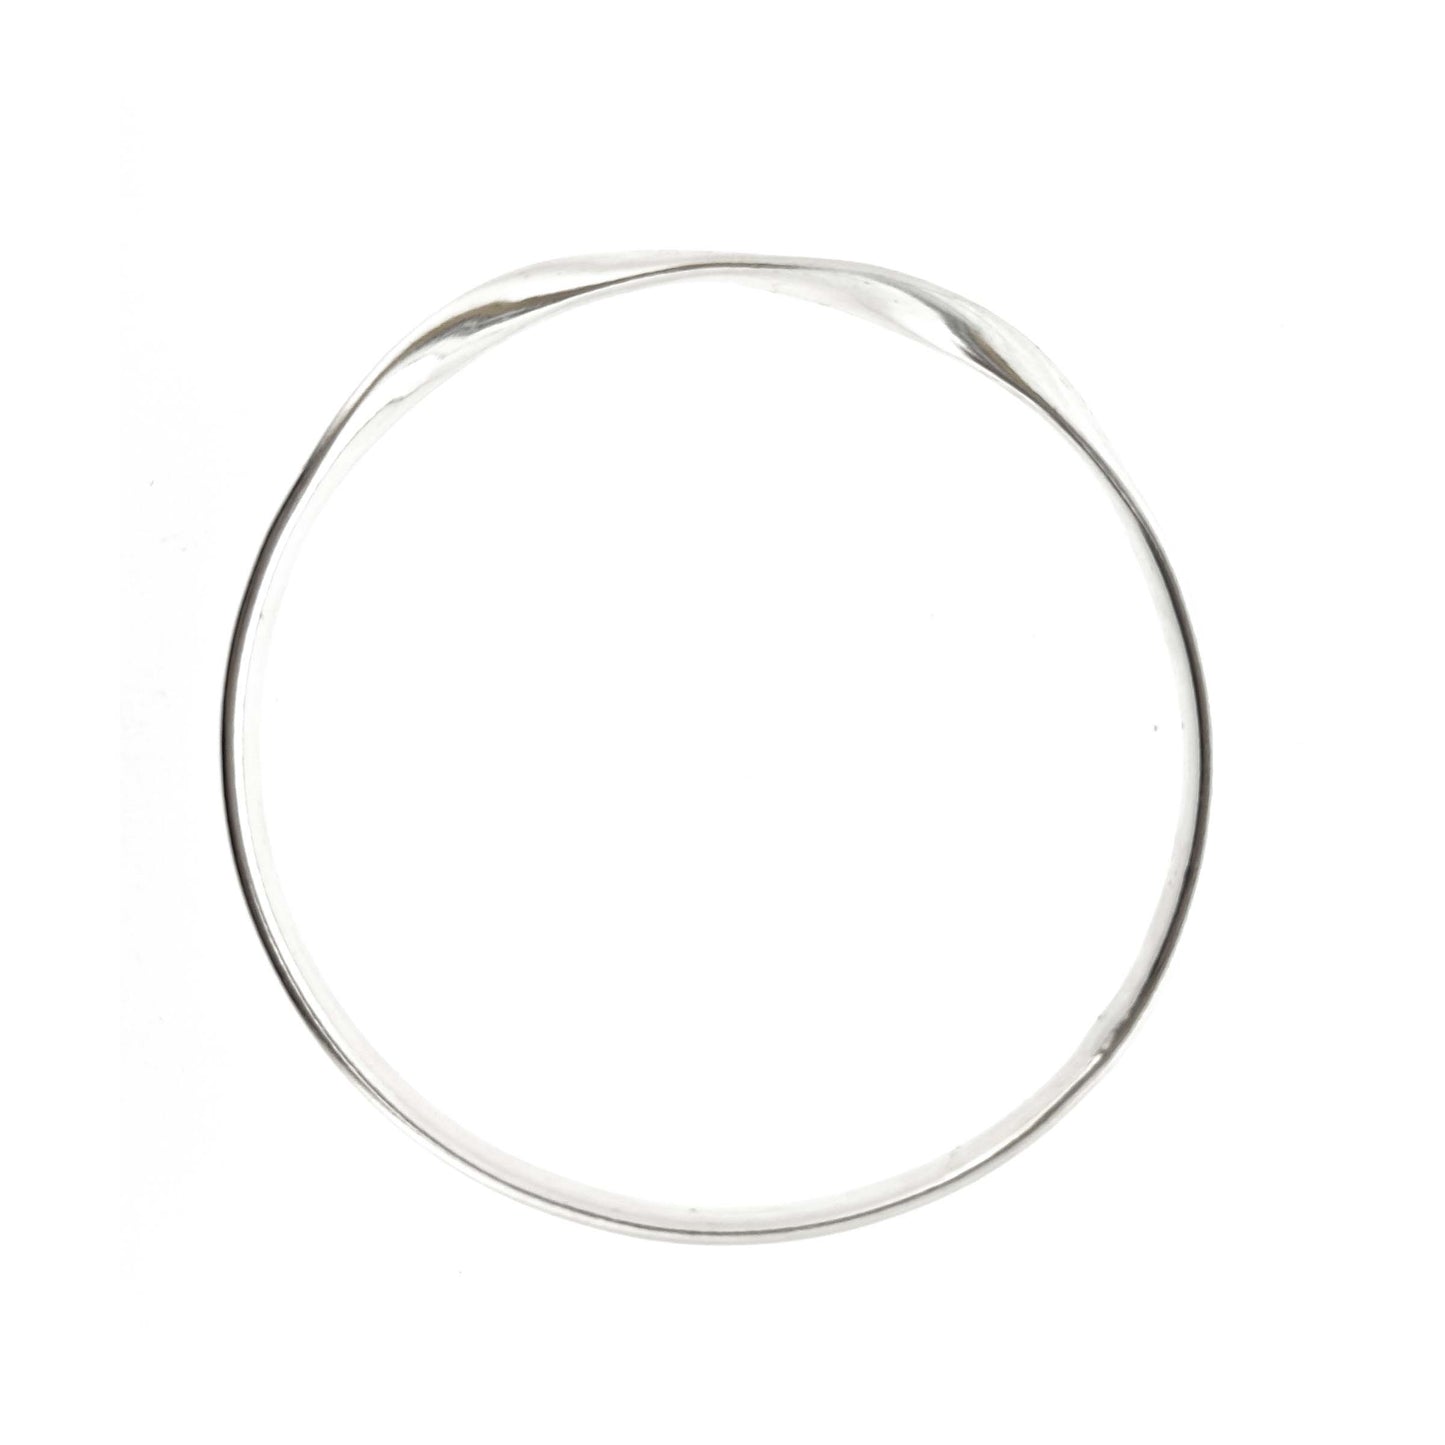 Round silver bangle with oval profile and a twist in one part.